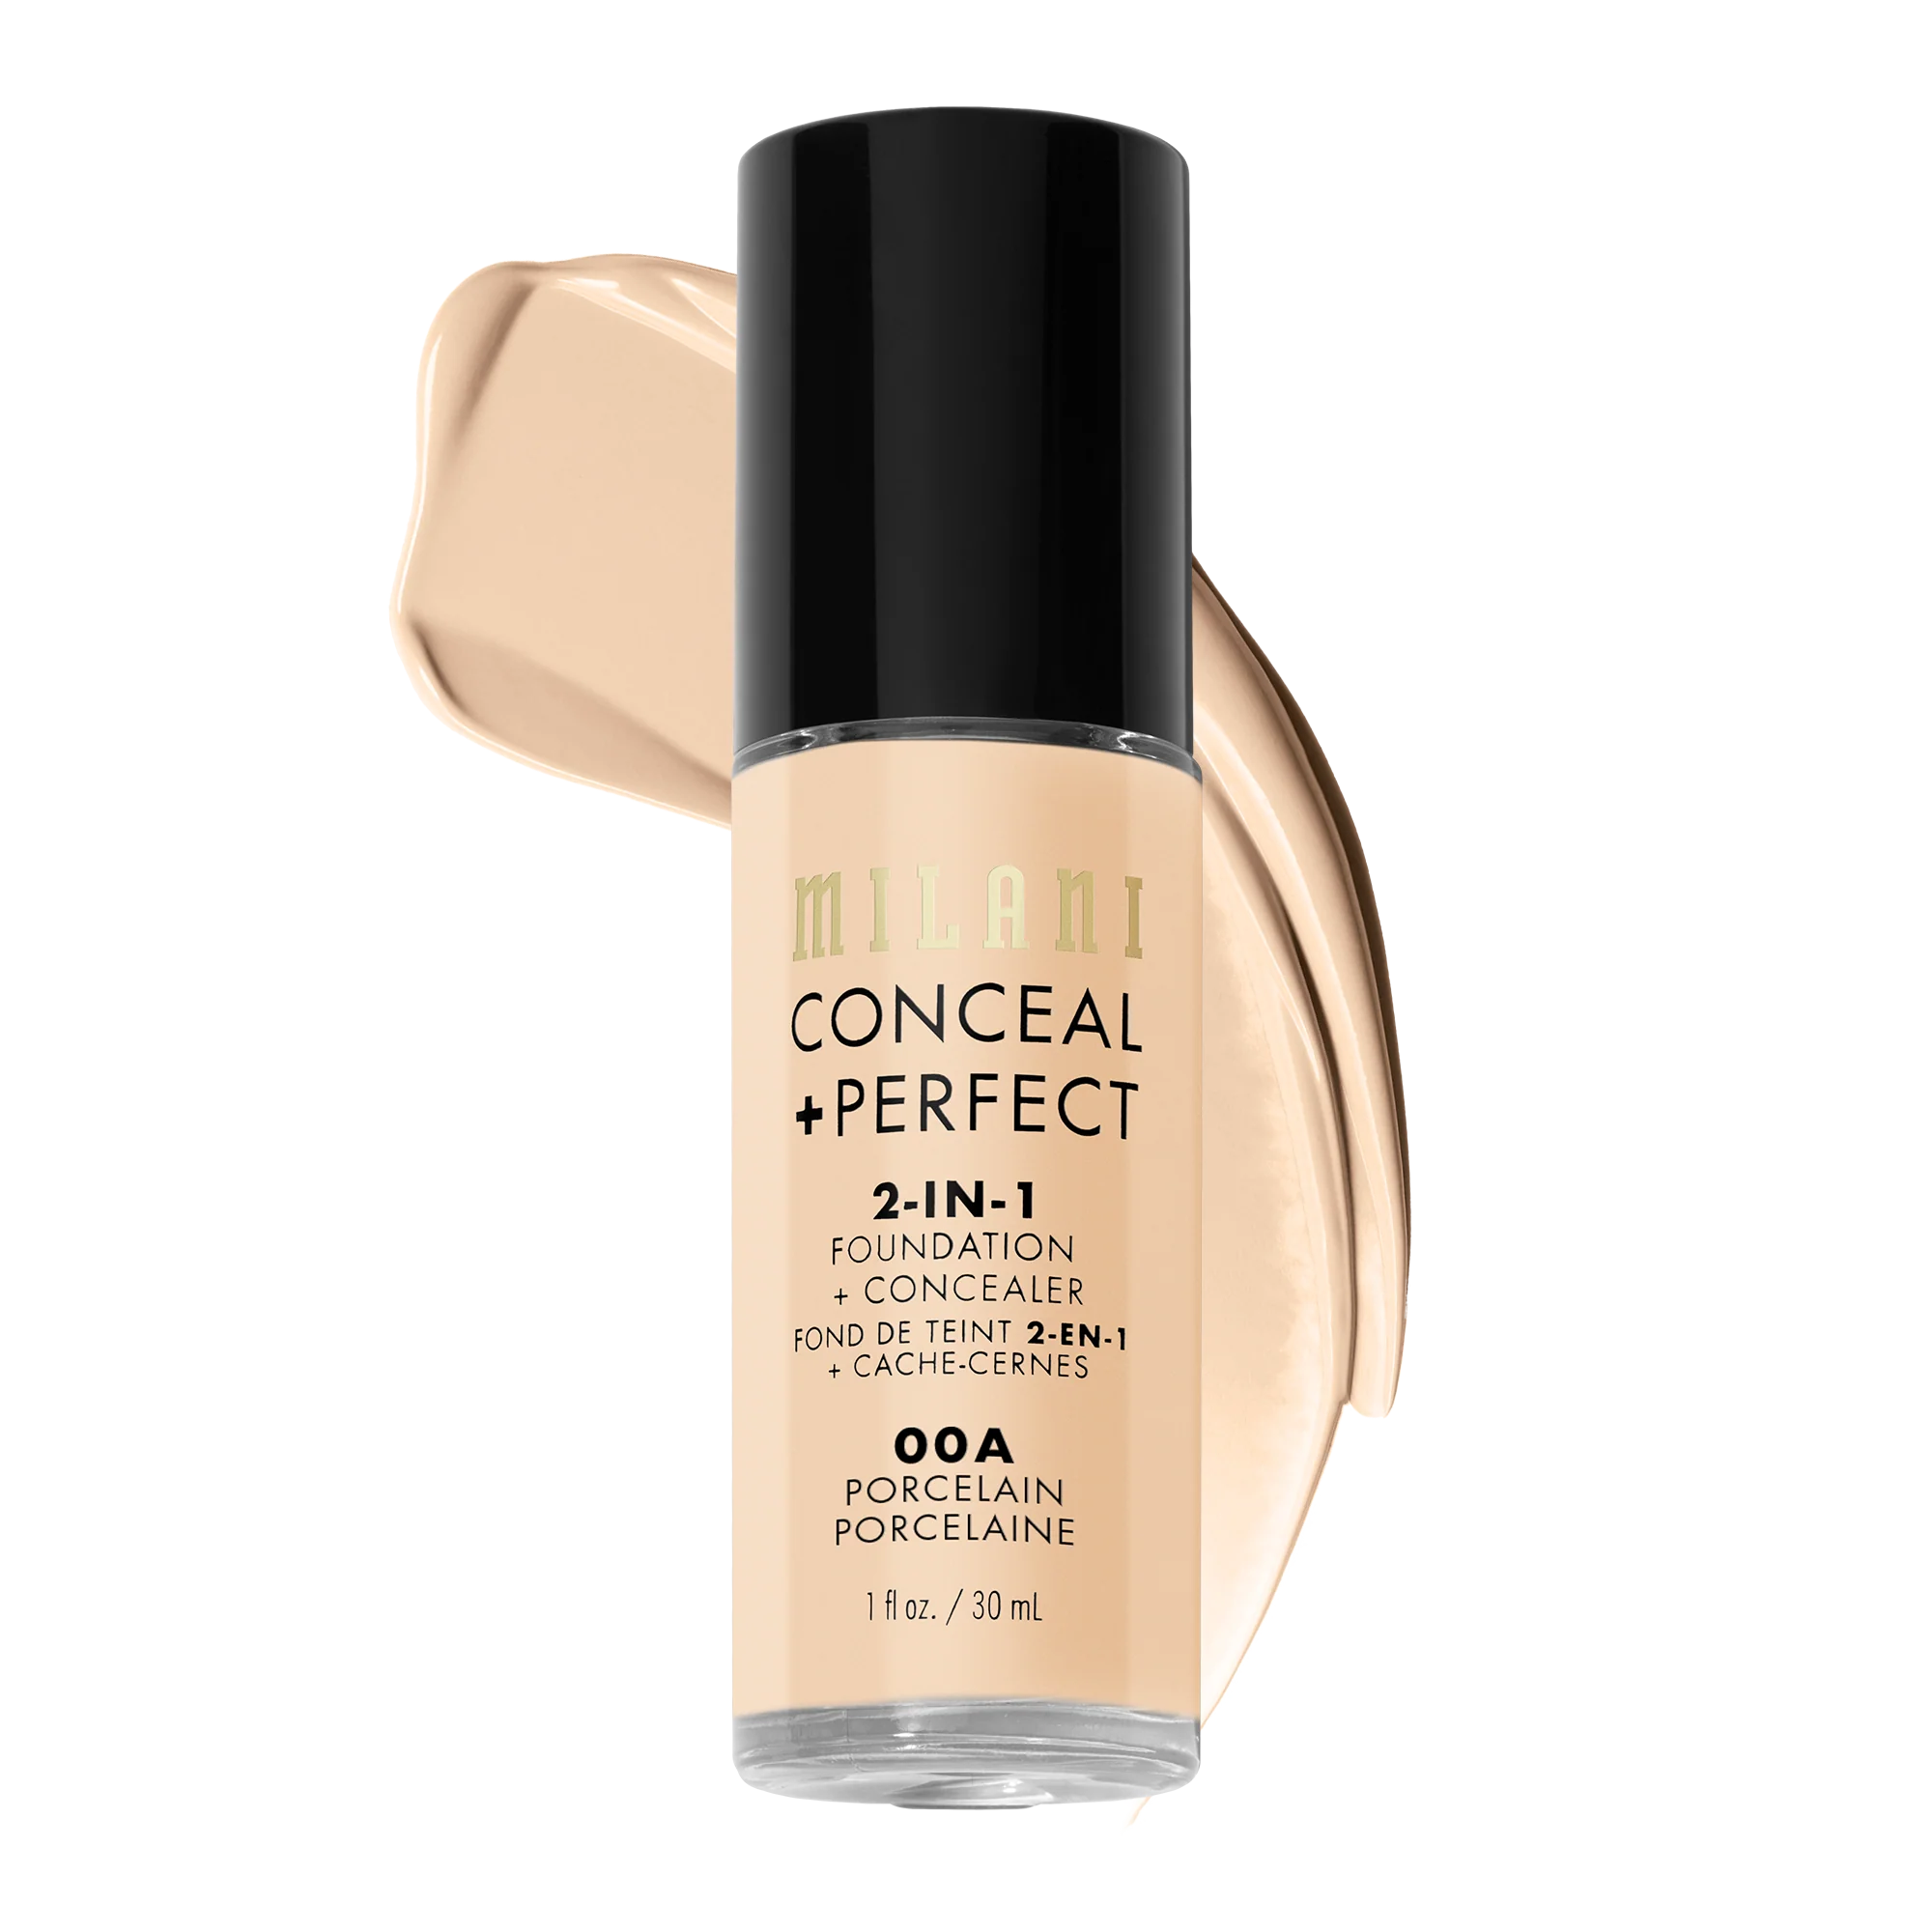 MILANI Conceal + Perfect 2-in-1 Foundation + Concealer - Porcelain #00A